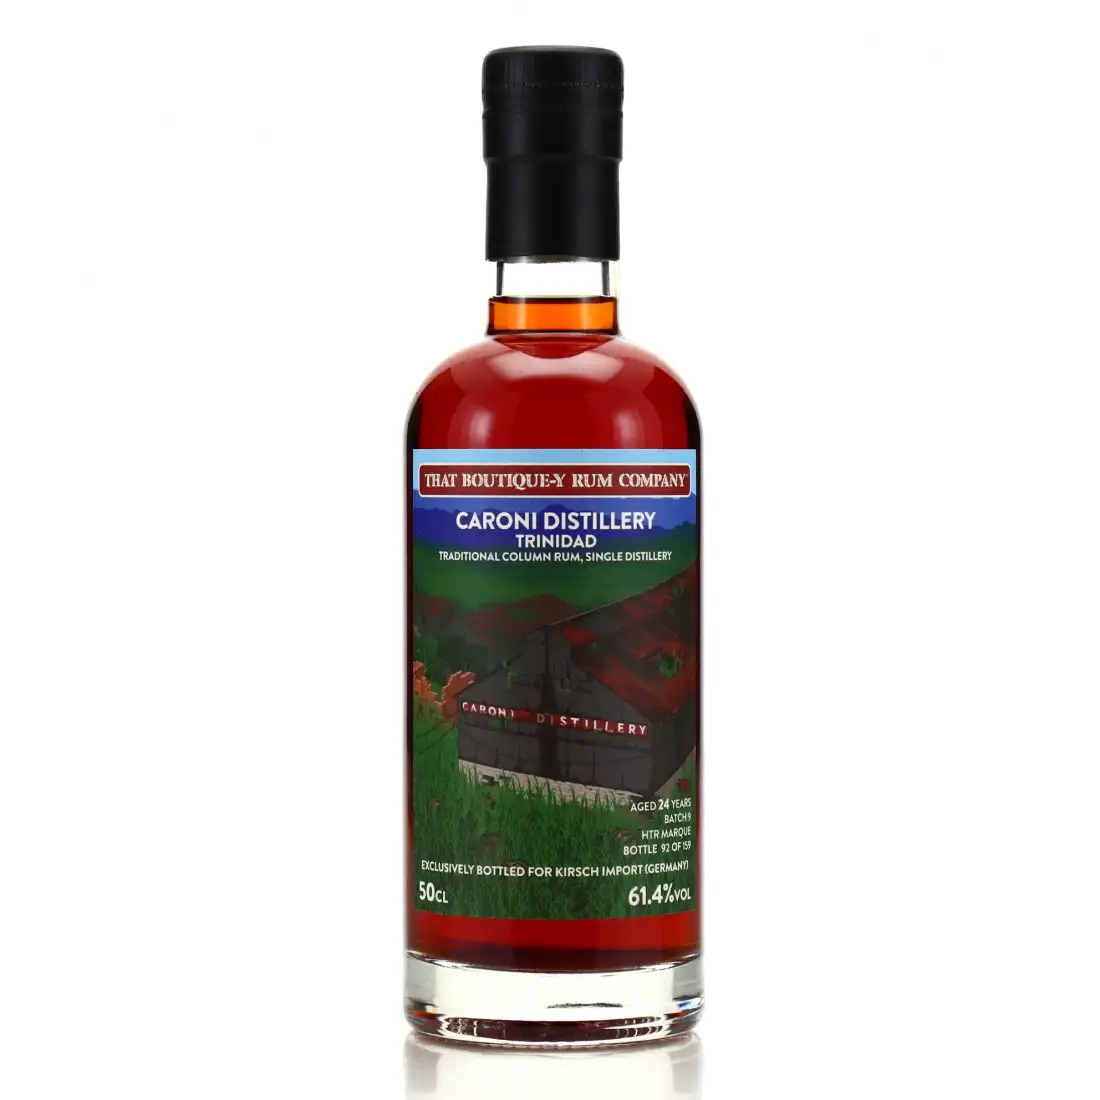 Image of the front of the bottle of the rum Caroni Distillery Heavy Trinidad Rum